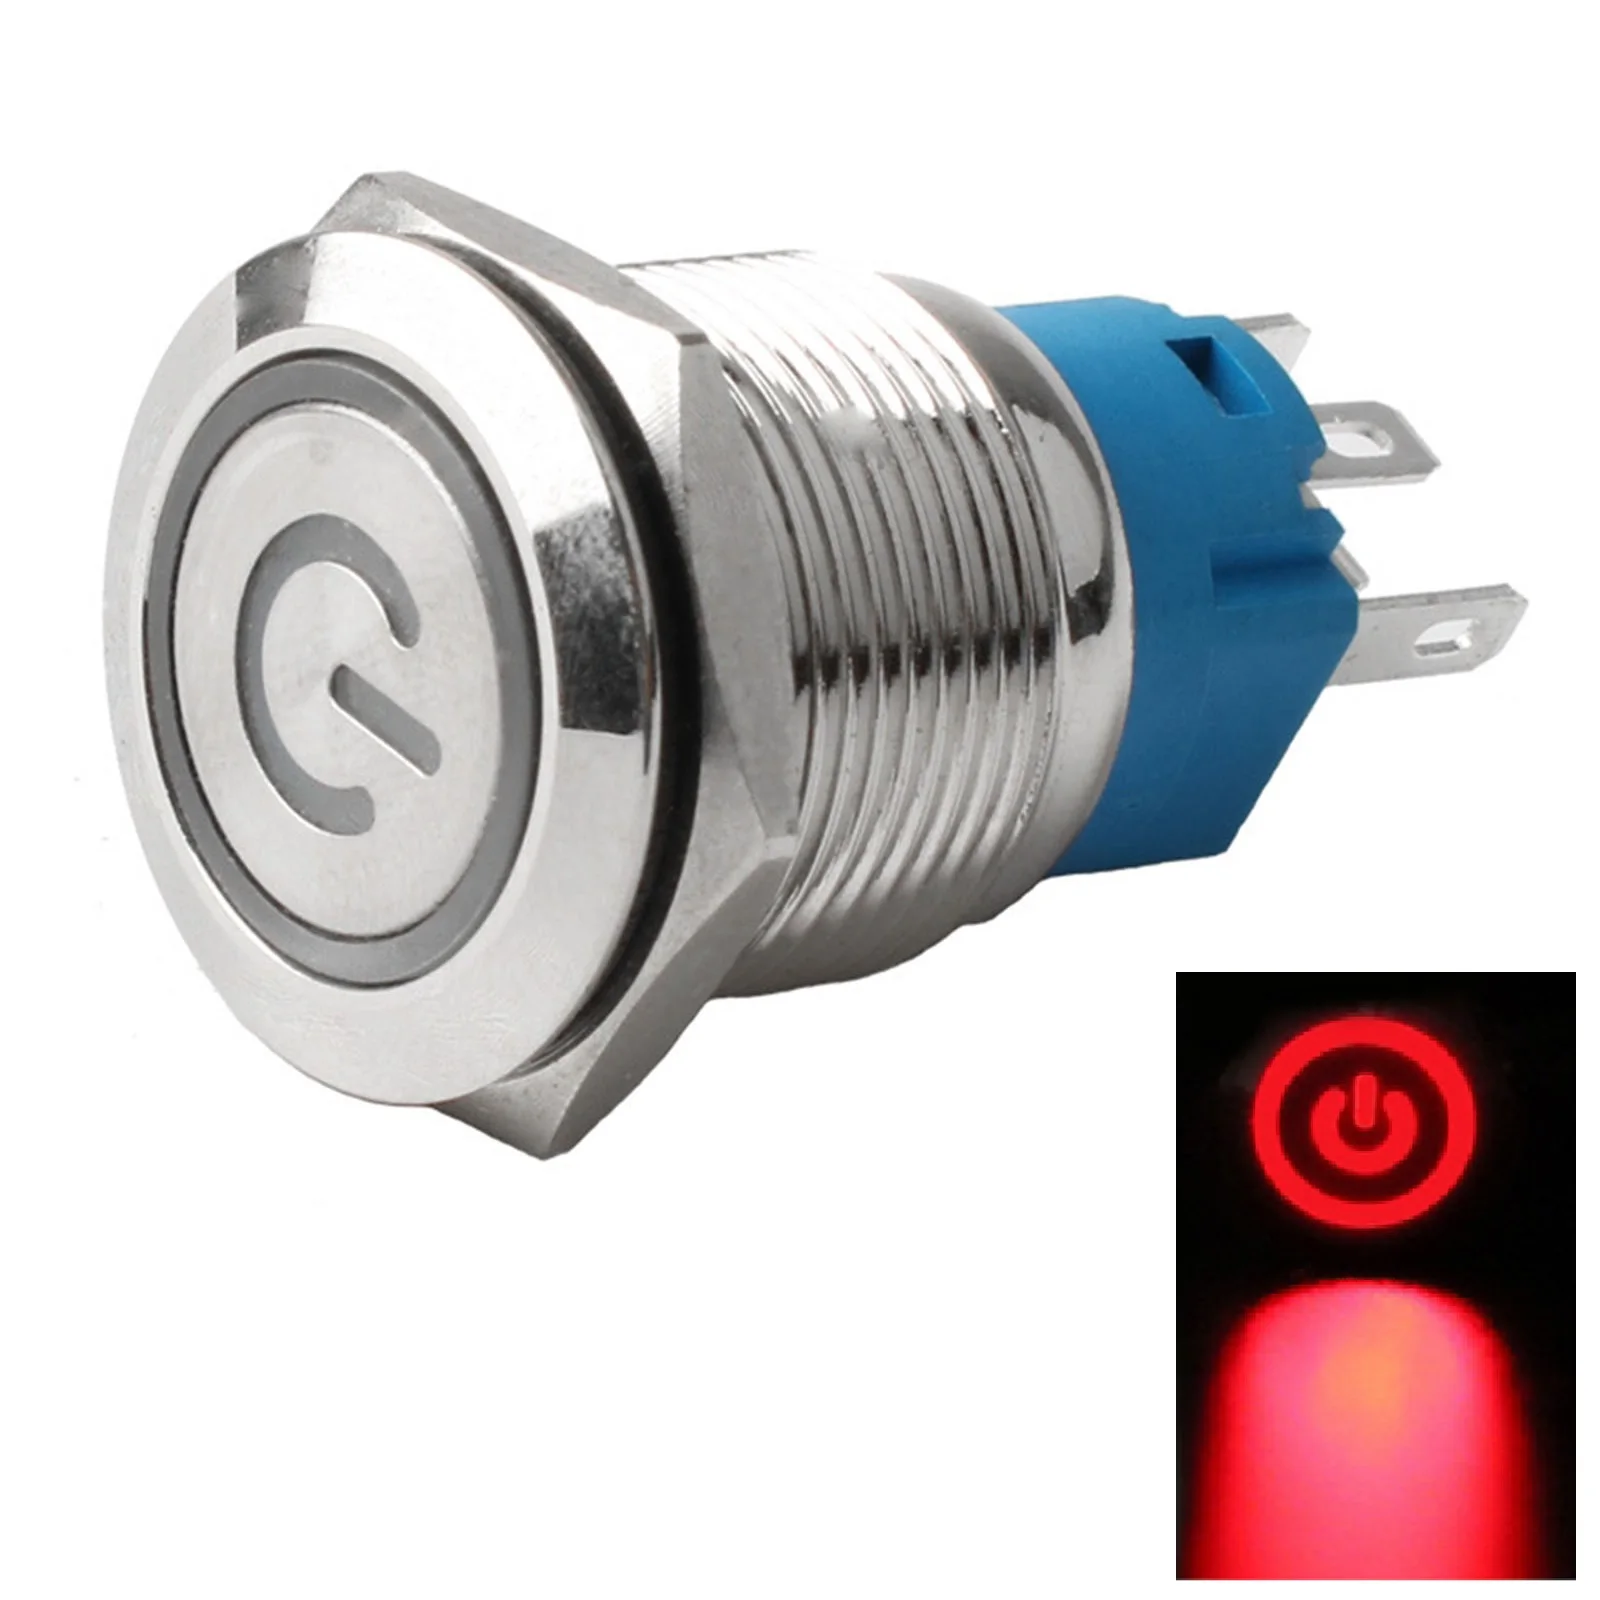 

19mm Metal Push Button Switch With Power LED 12-24V Momentary Button Switch WaterProof 4A 1NO 1NC Electrical Equipment Parts